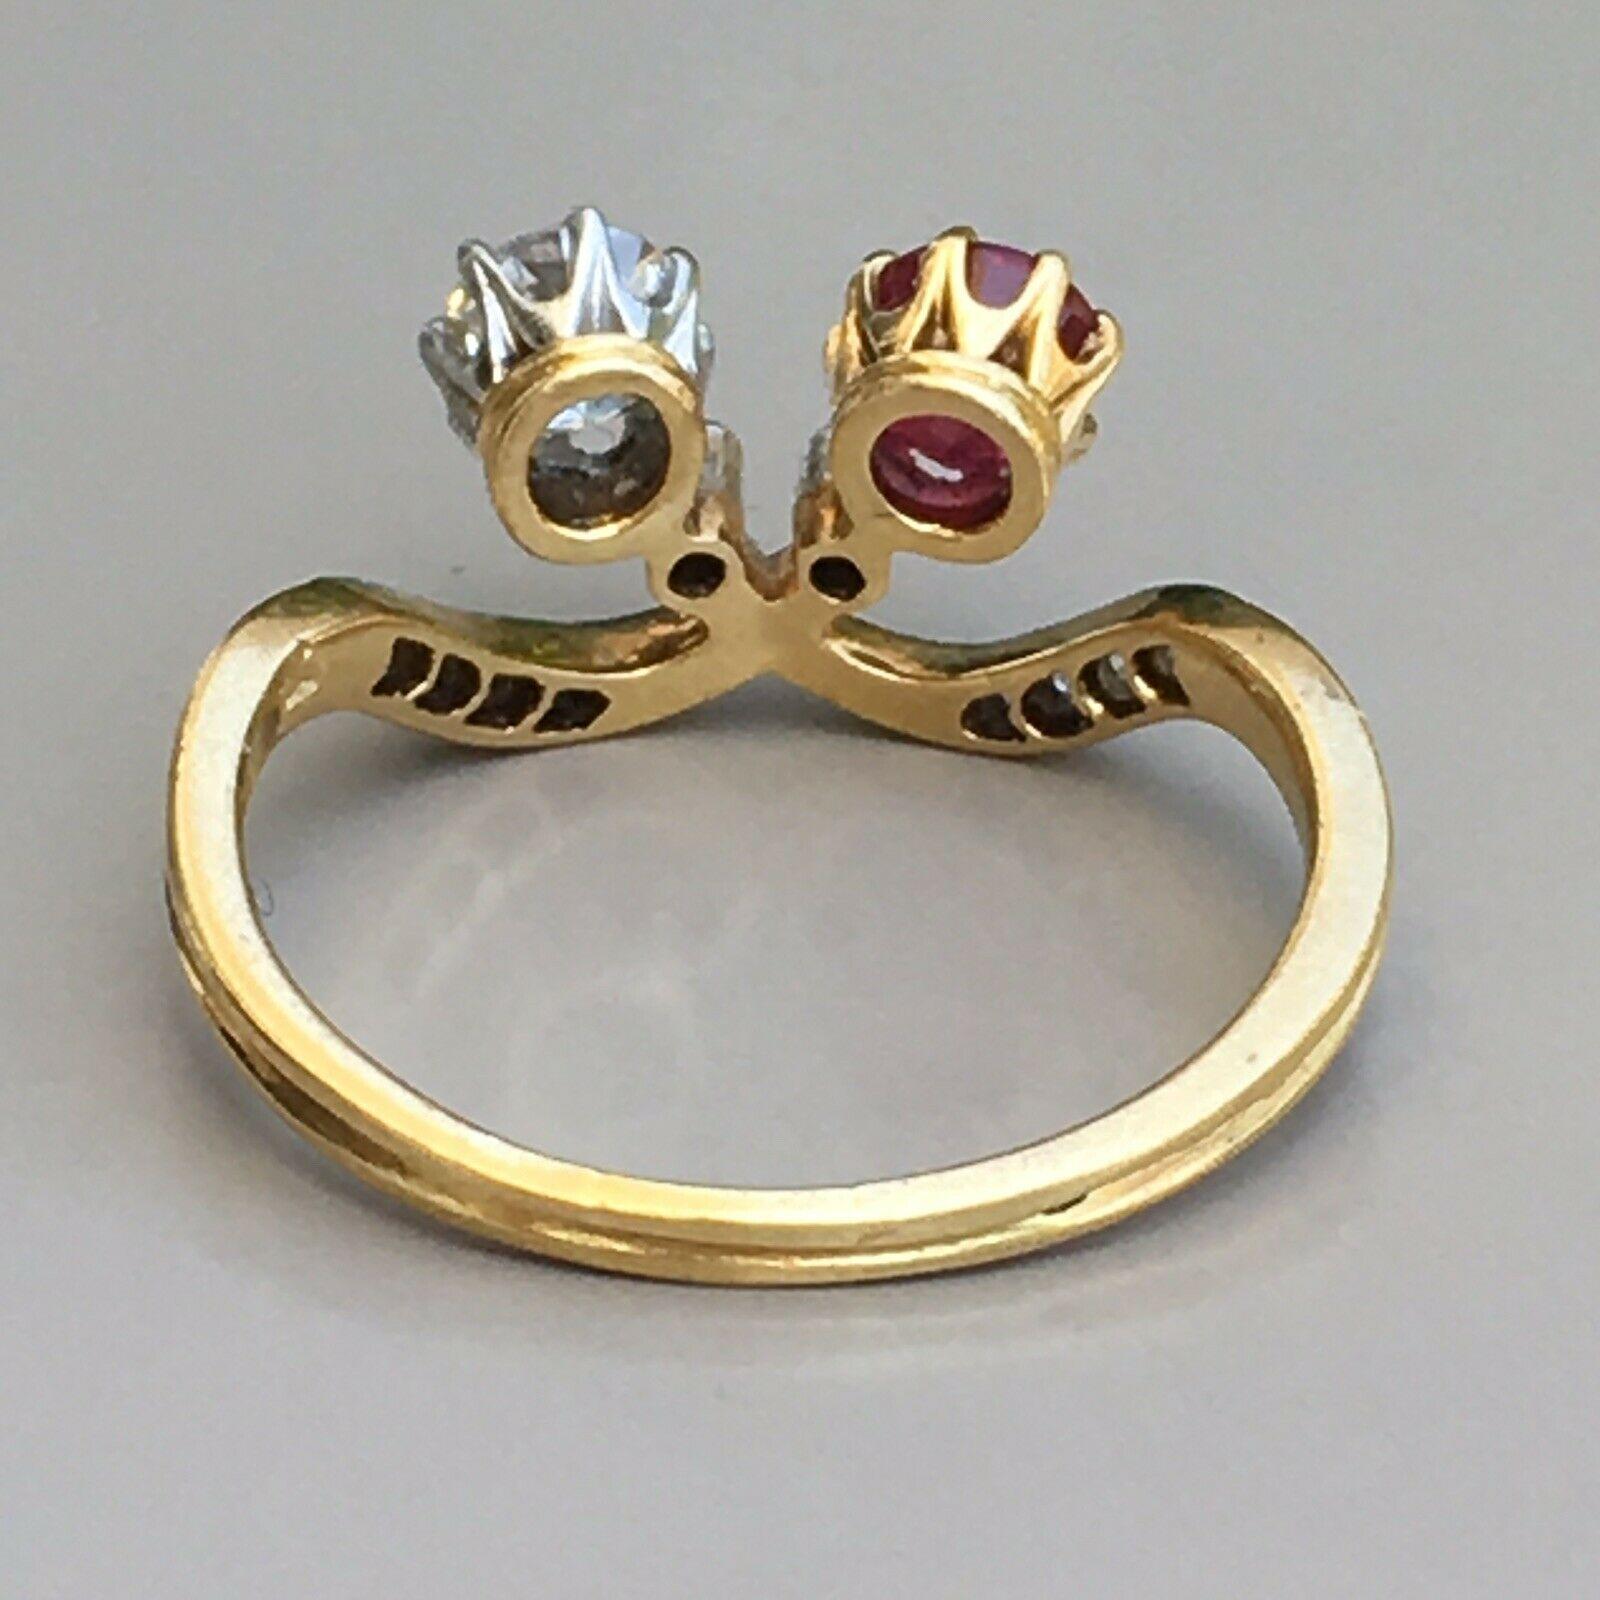 Edwardian 1900s Antique Toi et Moi Burma Ruby and Diamond Platinum 18K Ring In Good Condition For Sale In Santa Monica, CA